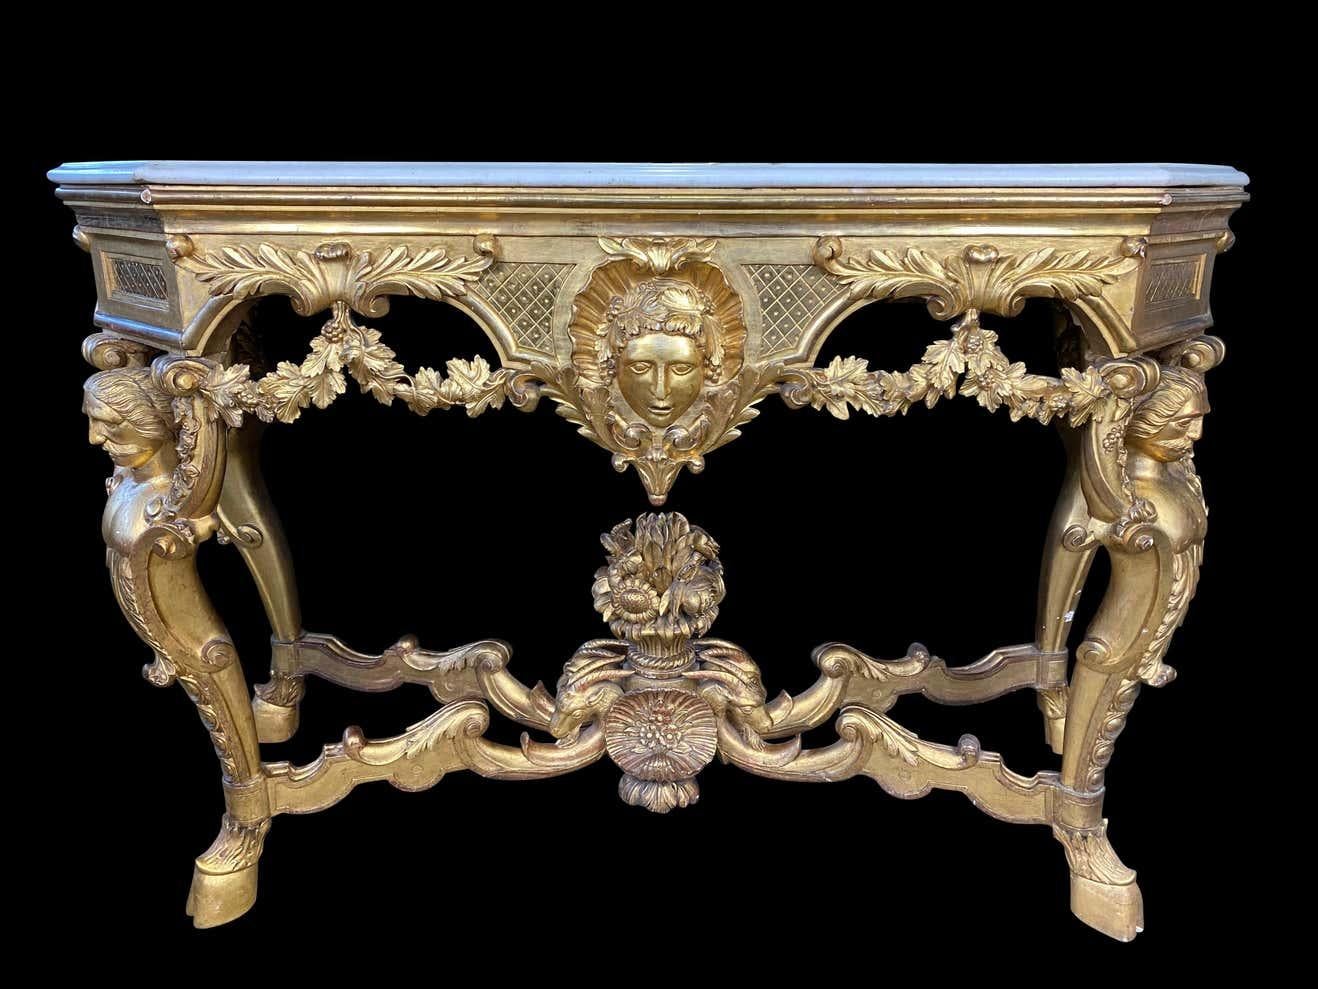 An elaborately carved and gilded Italian console in the Rococo taste, the shaped white marble top lies above a flower-filled pattern with trailing blossoms, alongside the gilded decoration. Exceptionally hand crafted from the 18th-19th